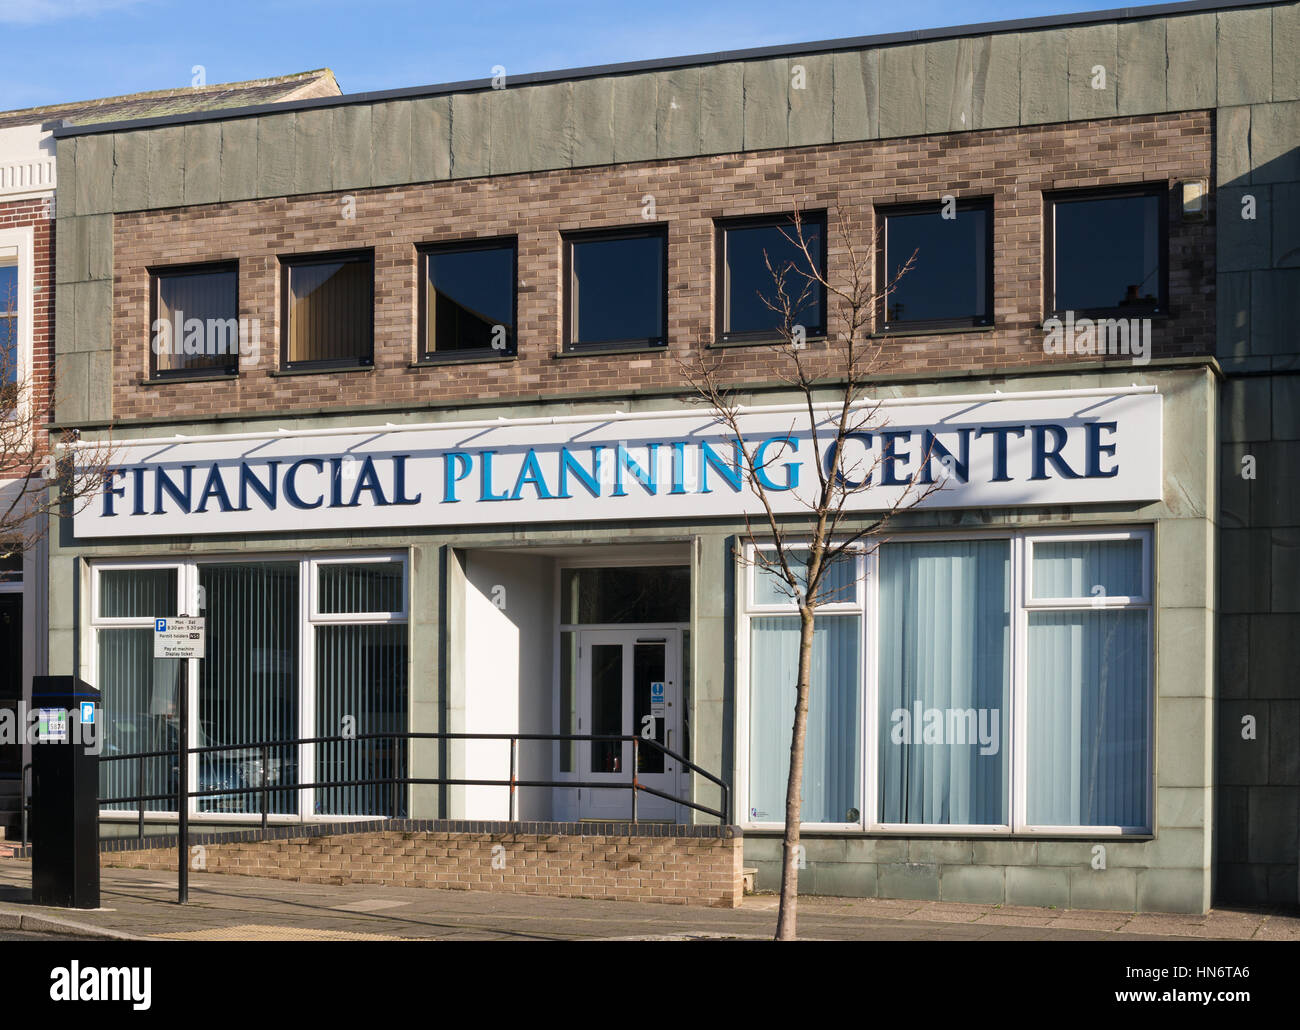 The Financial Planning Centre, North Shields, north east England, UK Stock Photo